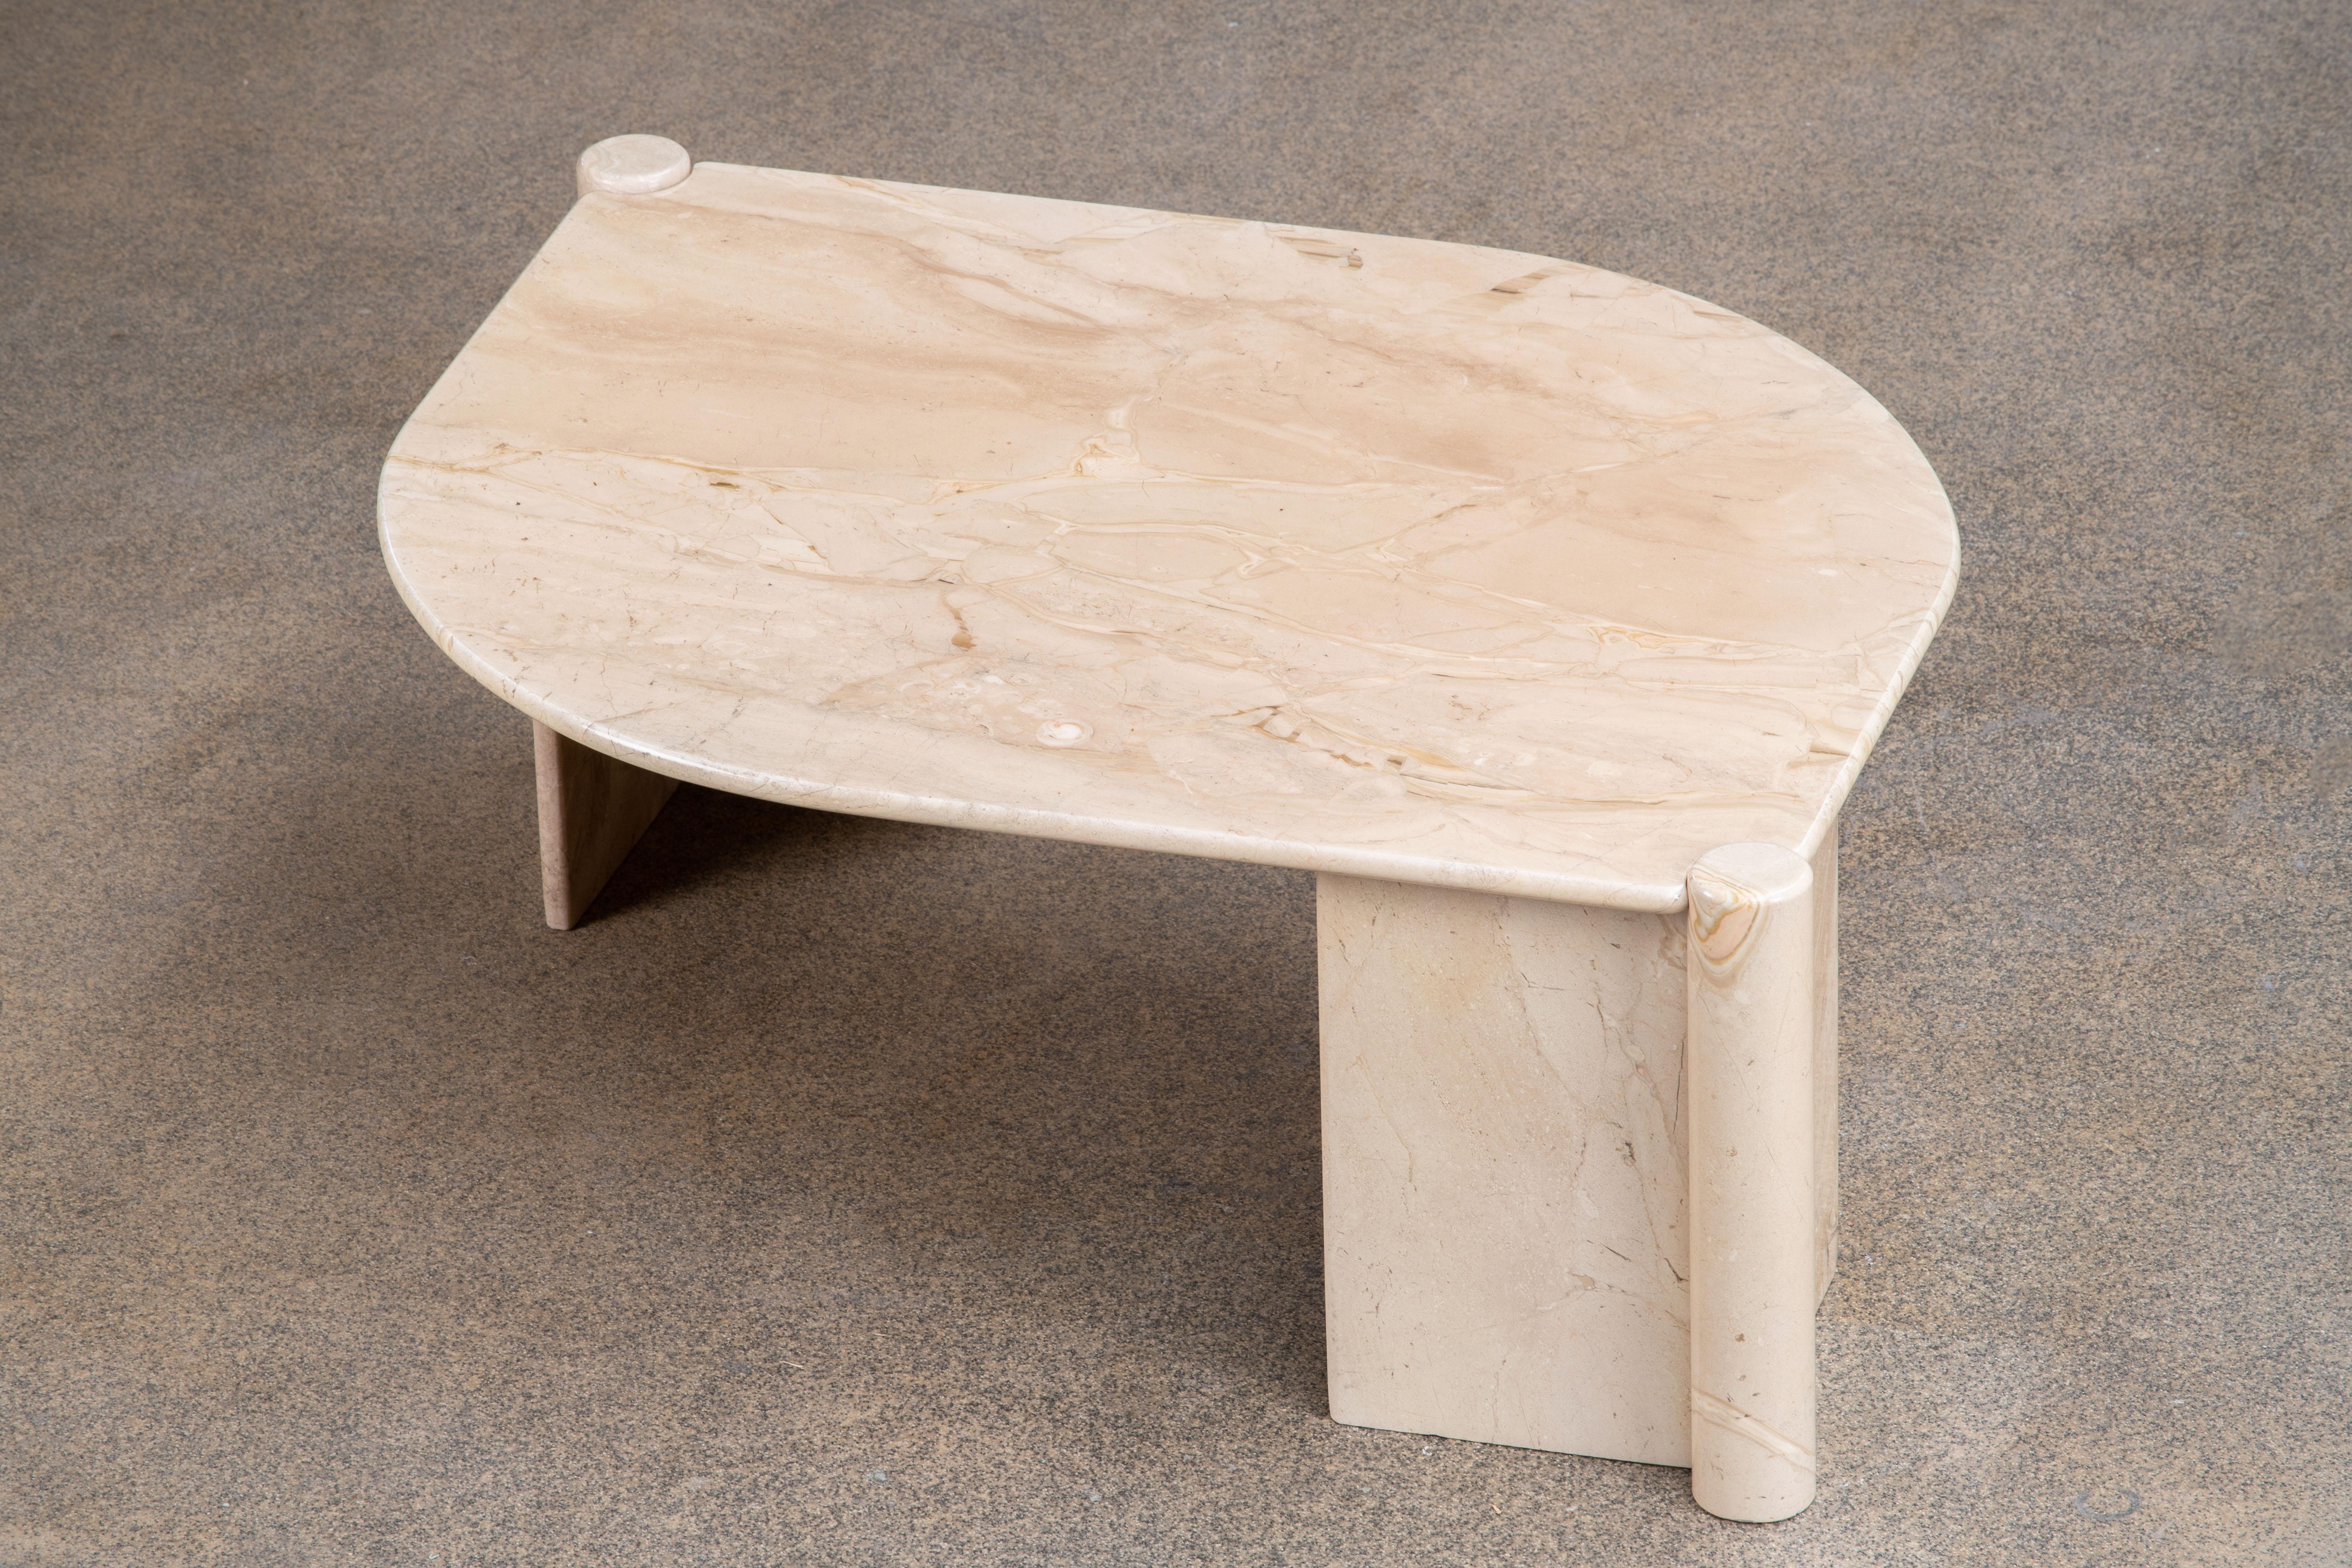 Beautiful grey, white and pink marble table.

The heavy eye-shaped top rests on two marble V blocks.